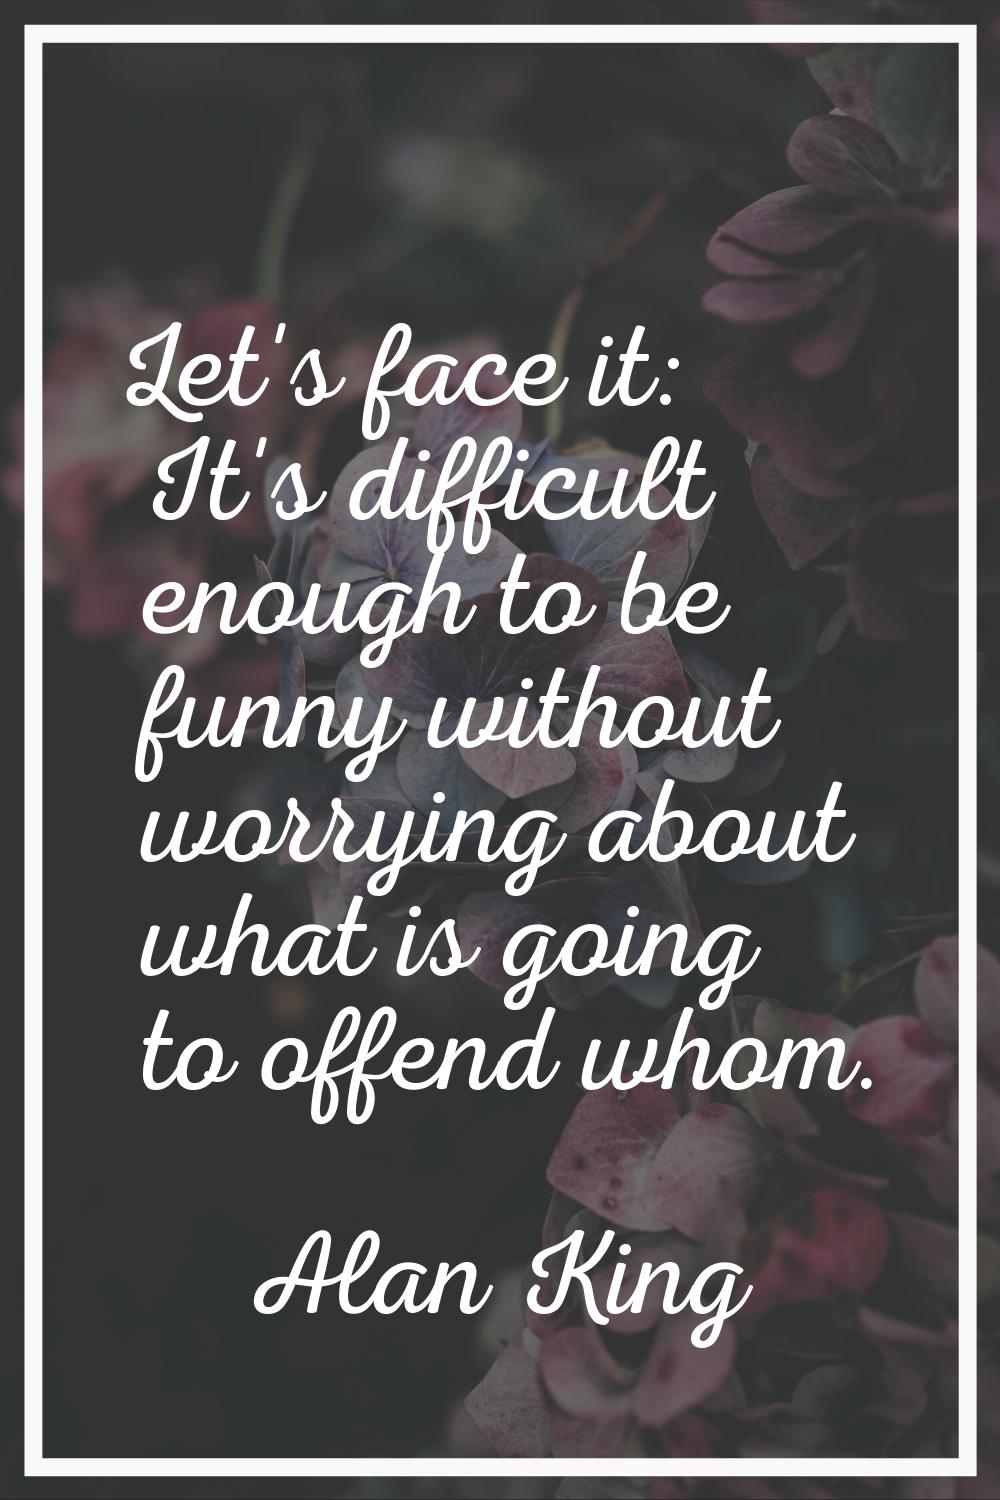 Let's face it: It's difficult enough to be funny without worrying about what is going to offend who